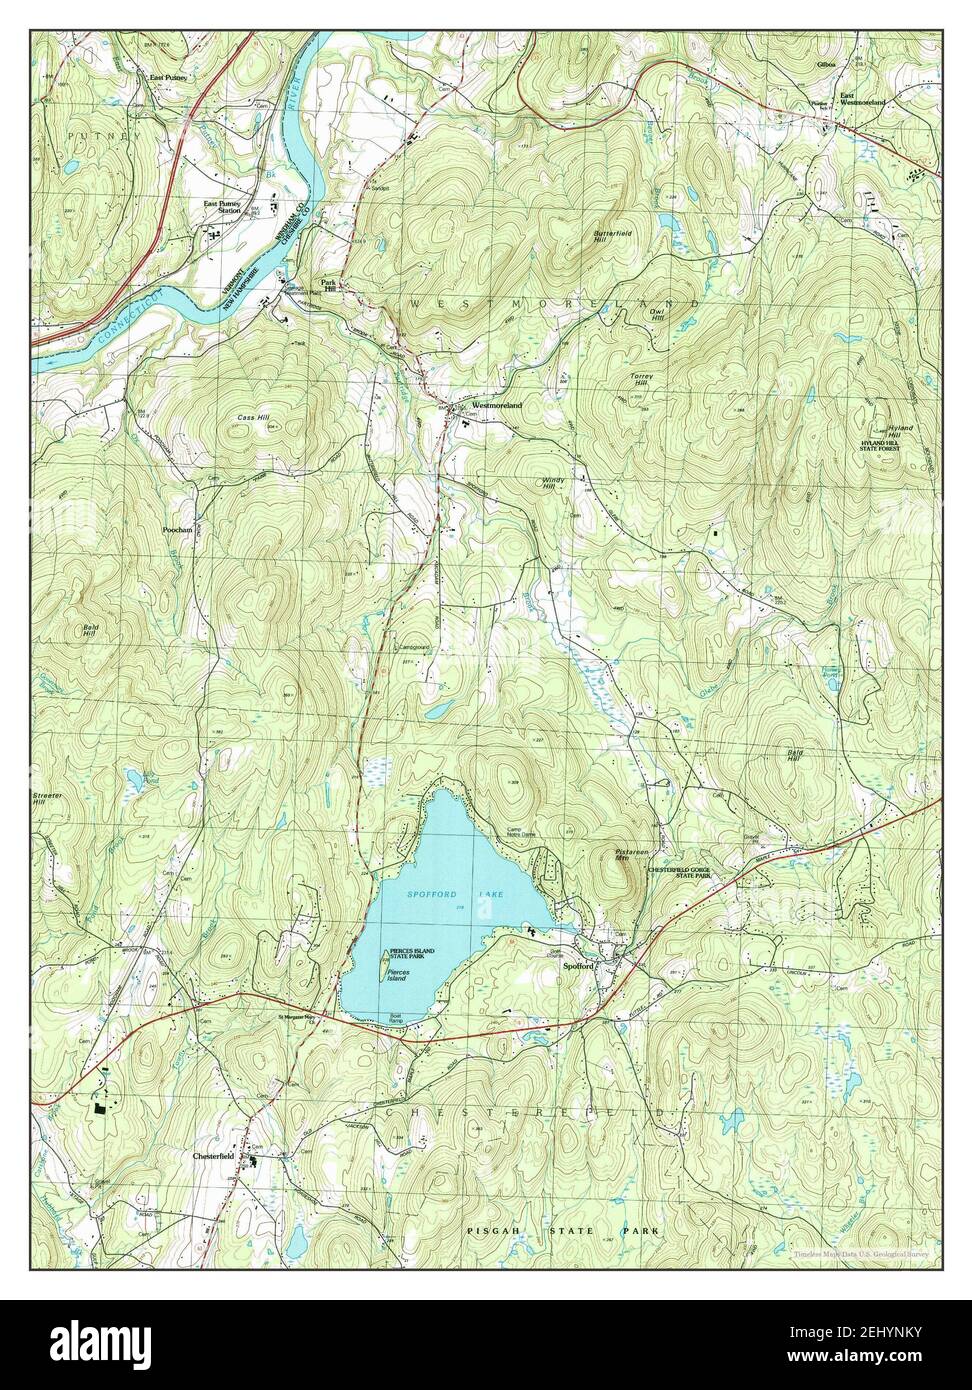 Spofford, New Hampshire, map 1998, 1:24000, United States of America by Timeless Maps, data U.S. Geological Survey Stock Photo